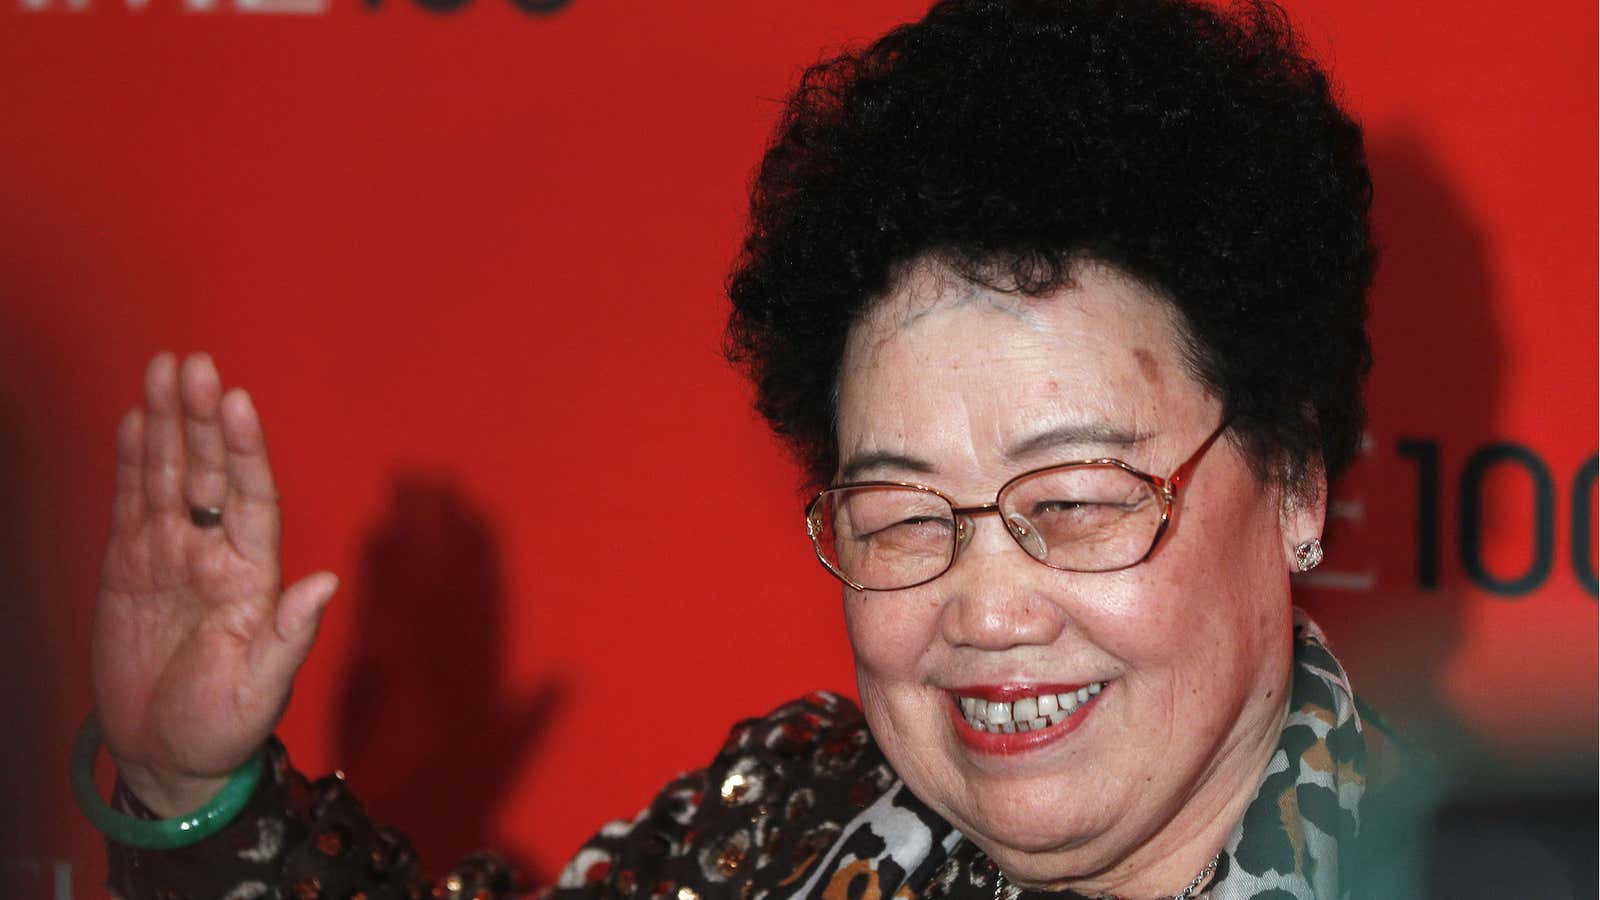 Chen Lihua started out in furniture repair and is now the world’s richest self-made woman.